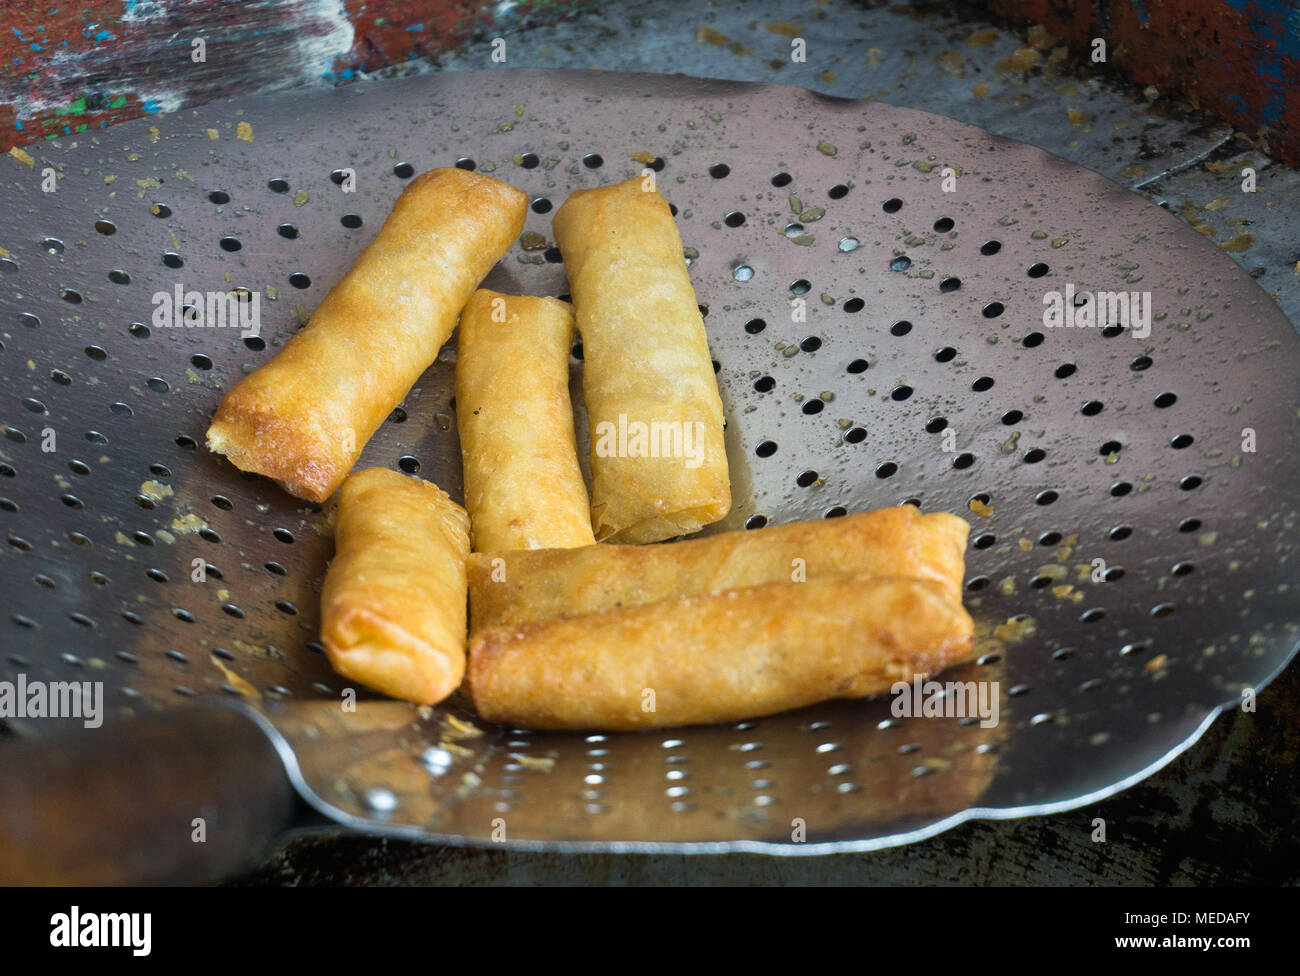 fried lumpia traditional food from semarang indonesia Stock Photo